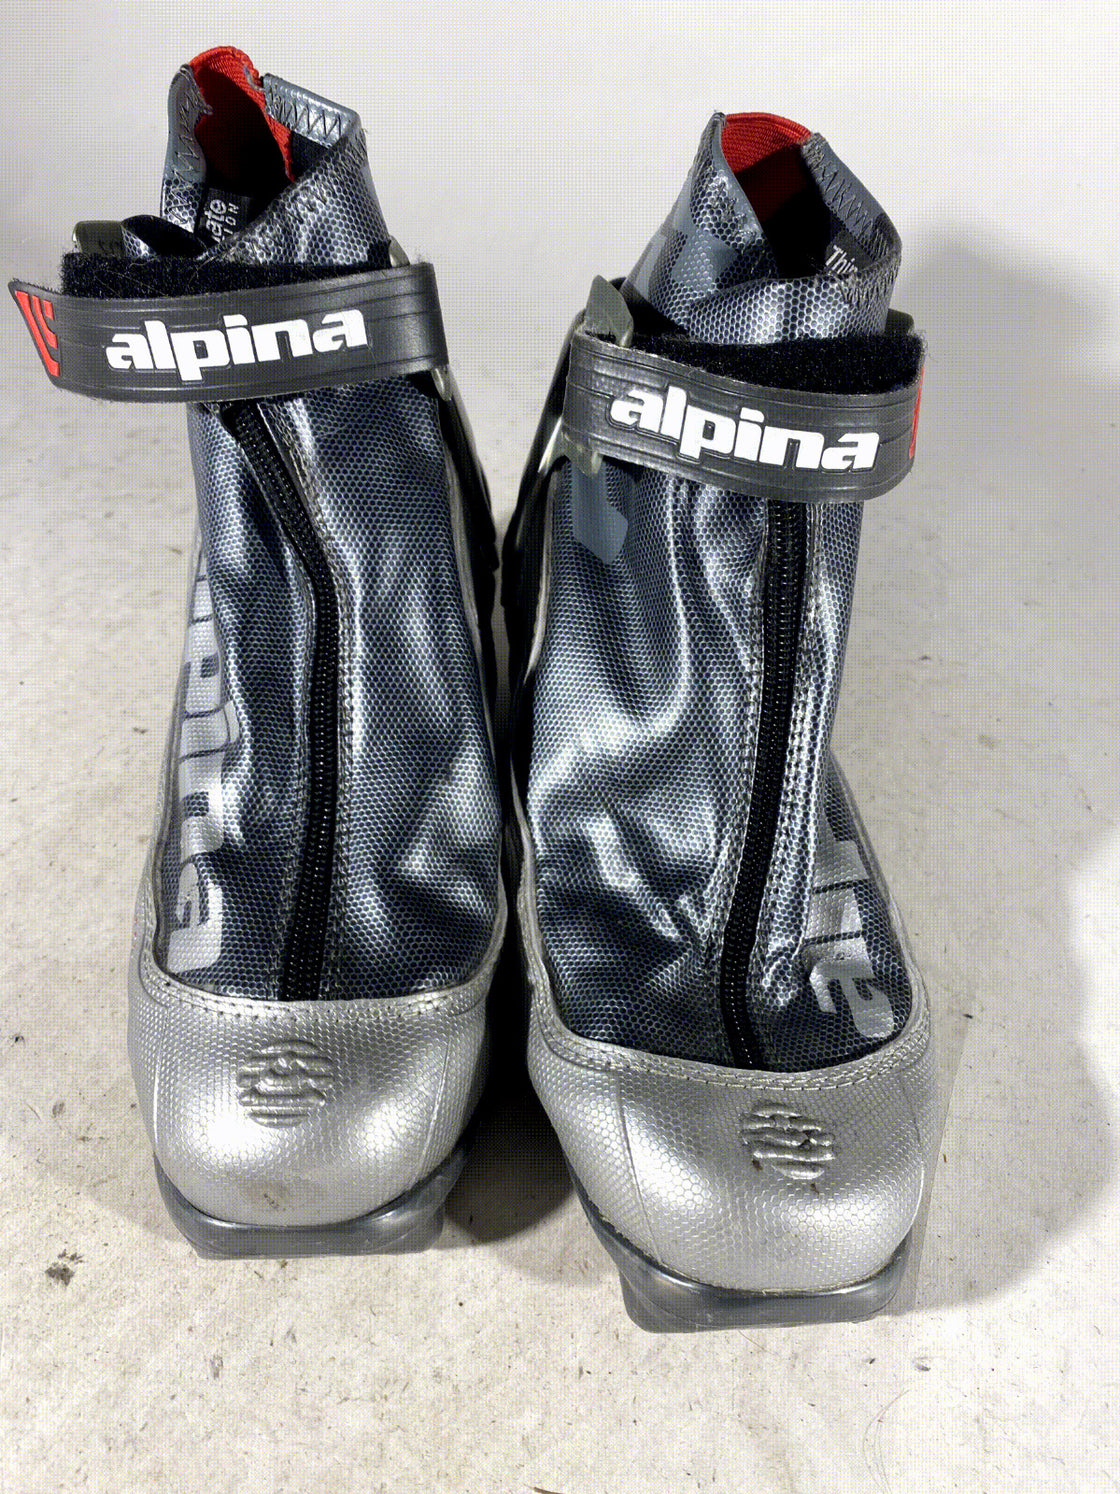 Alpina S Combi Nordic Cross Country Ski Boots Size EU36 US4.5 for NNN